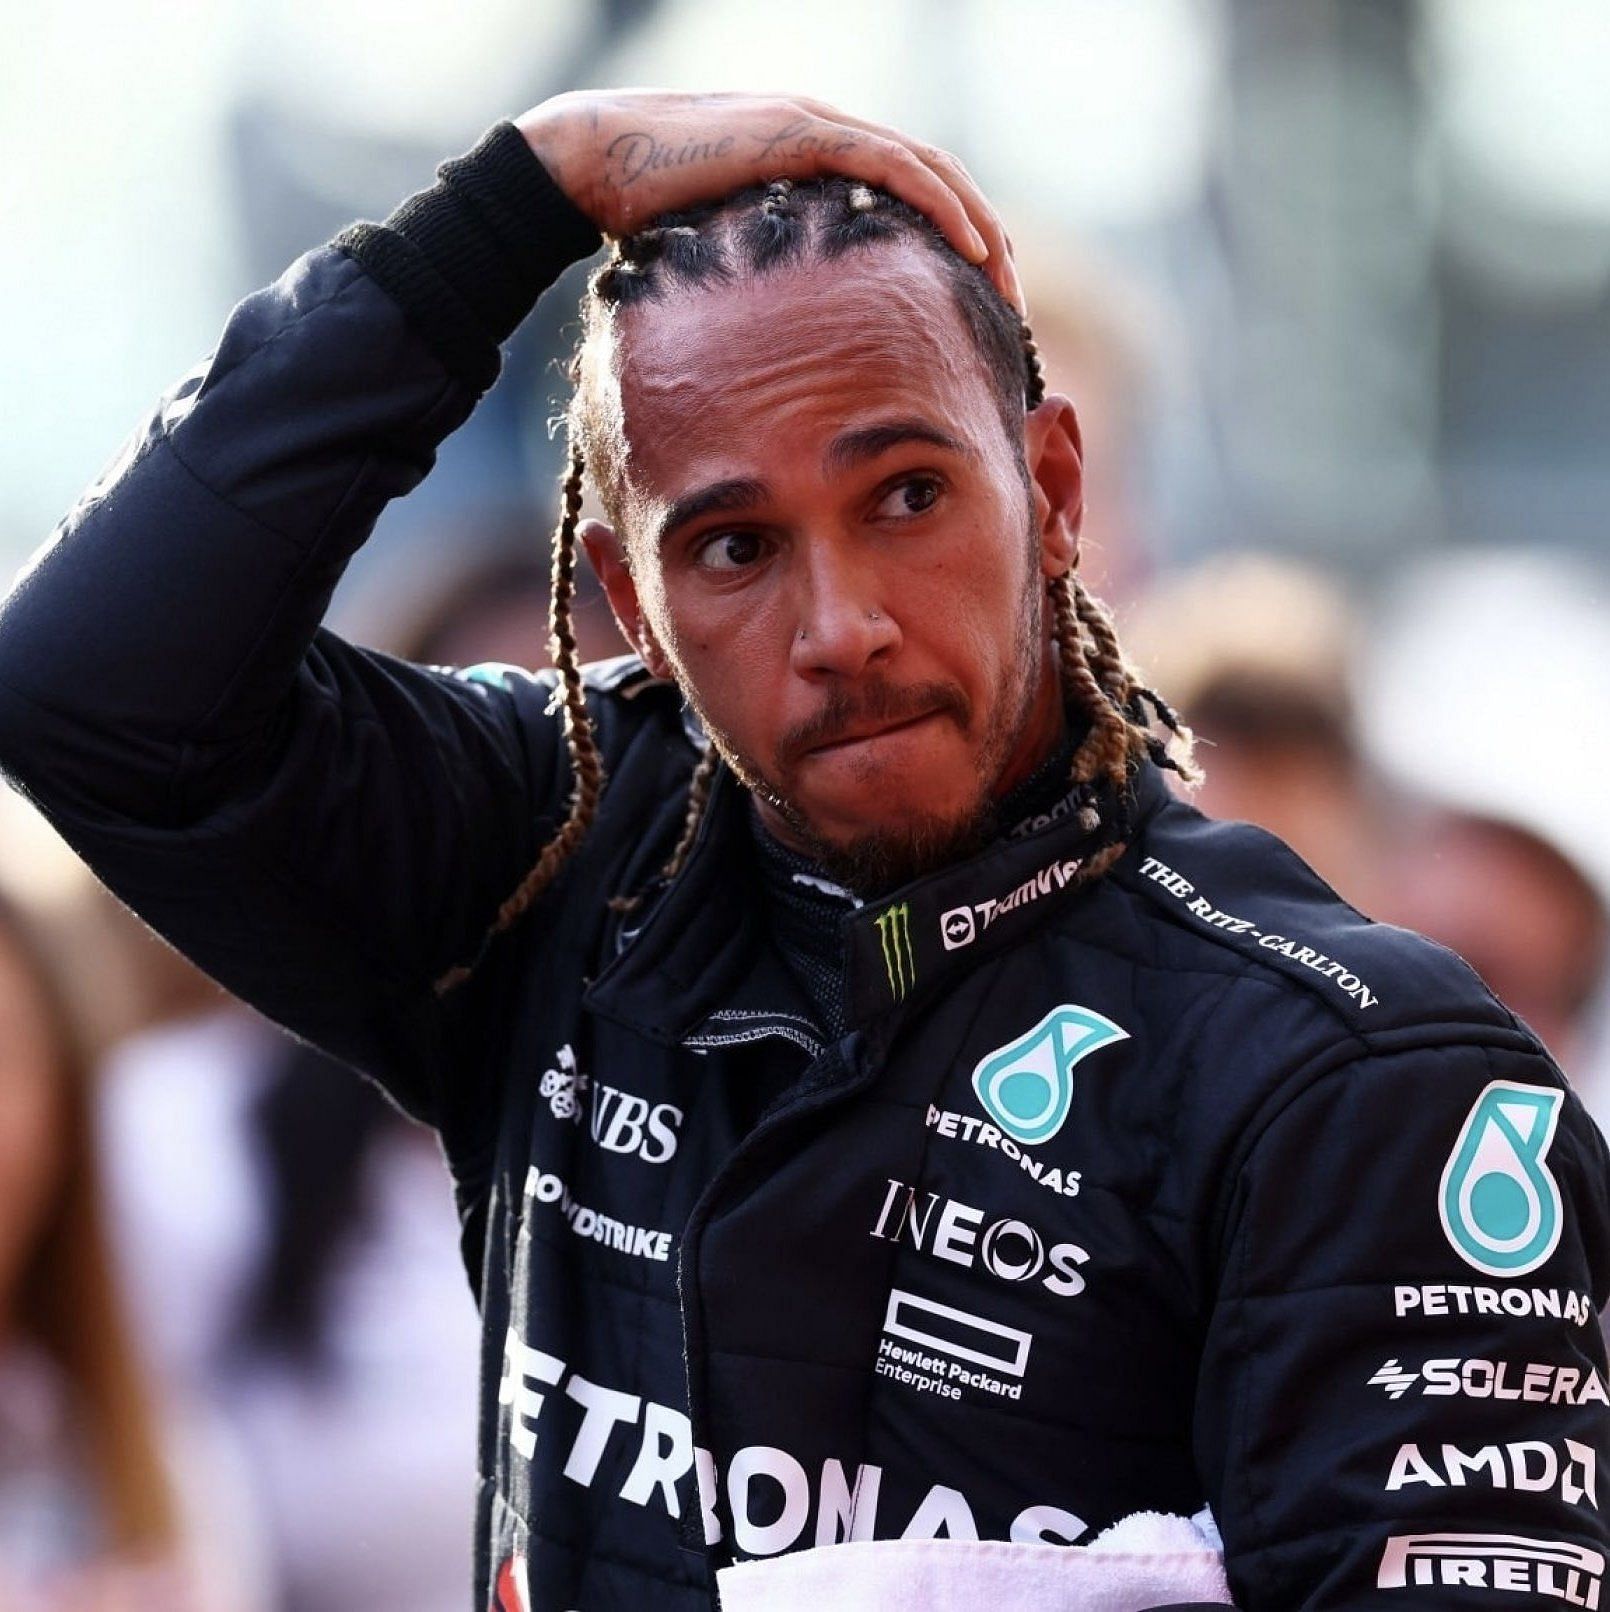 The Mercedes camp was left disappointed after Lewis Hamilton